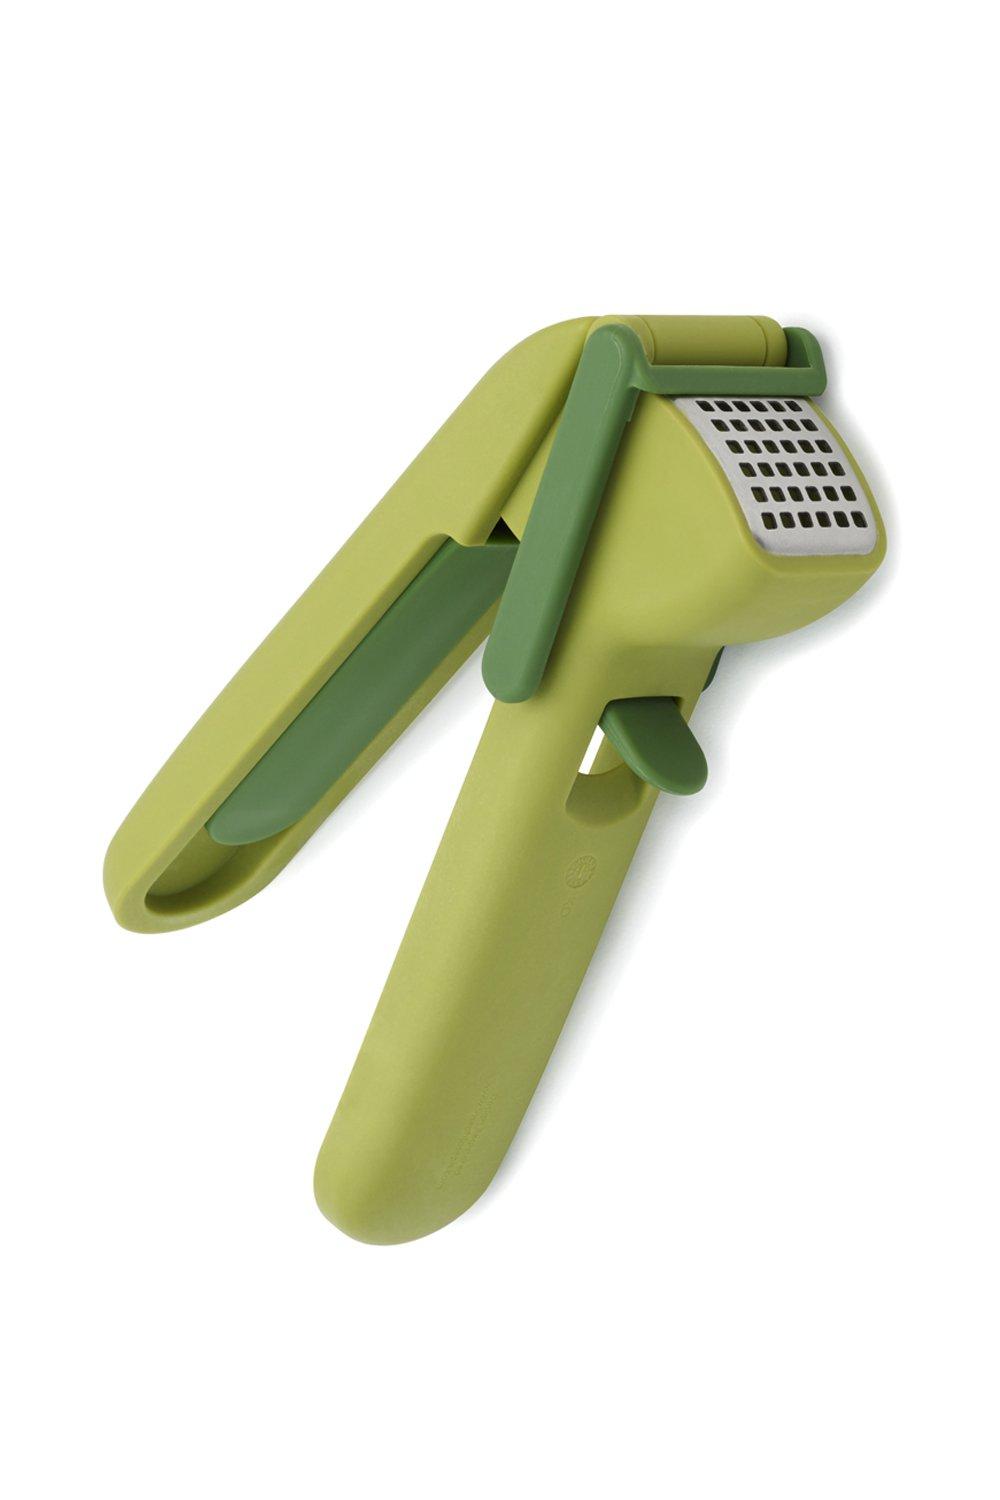 Picture of Cleanforce Garlic Press